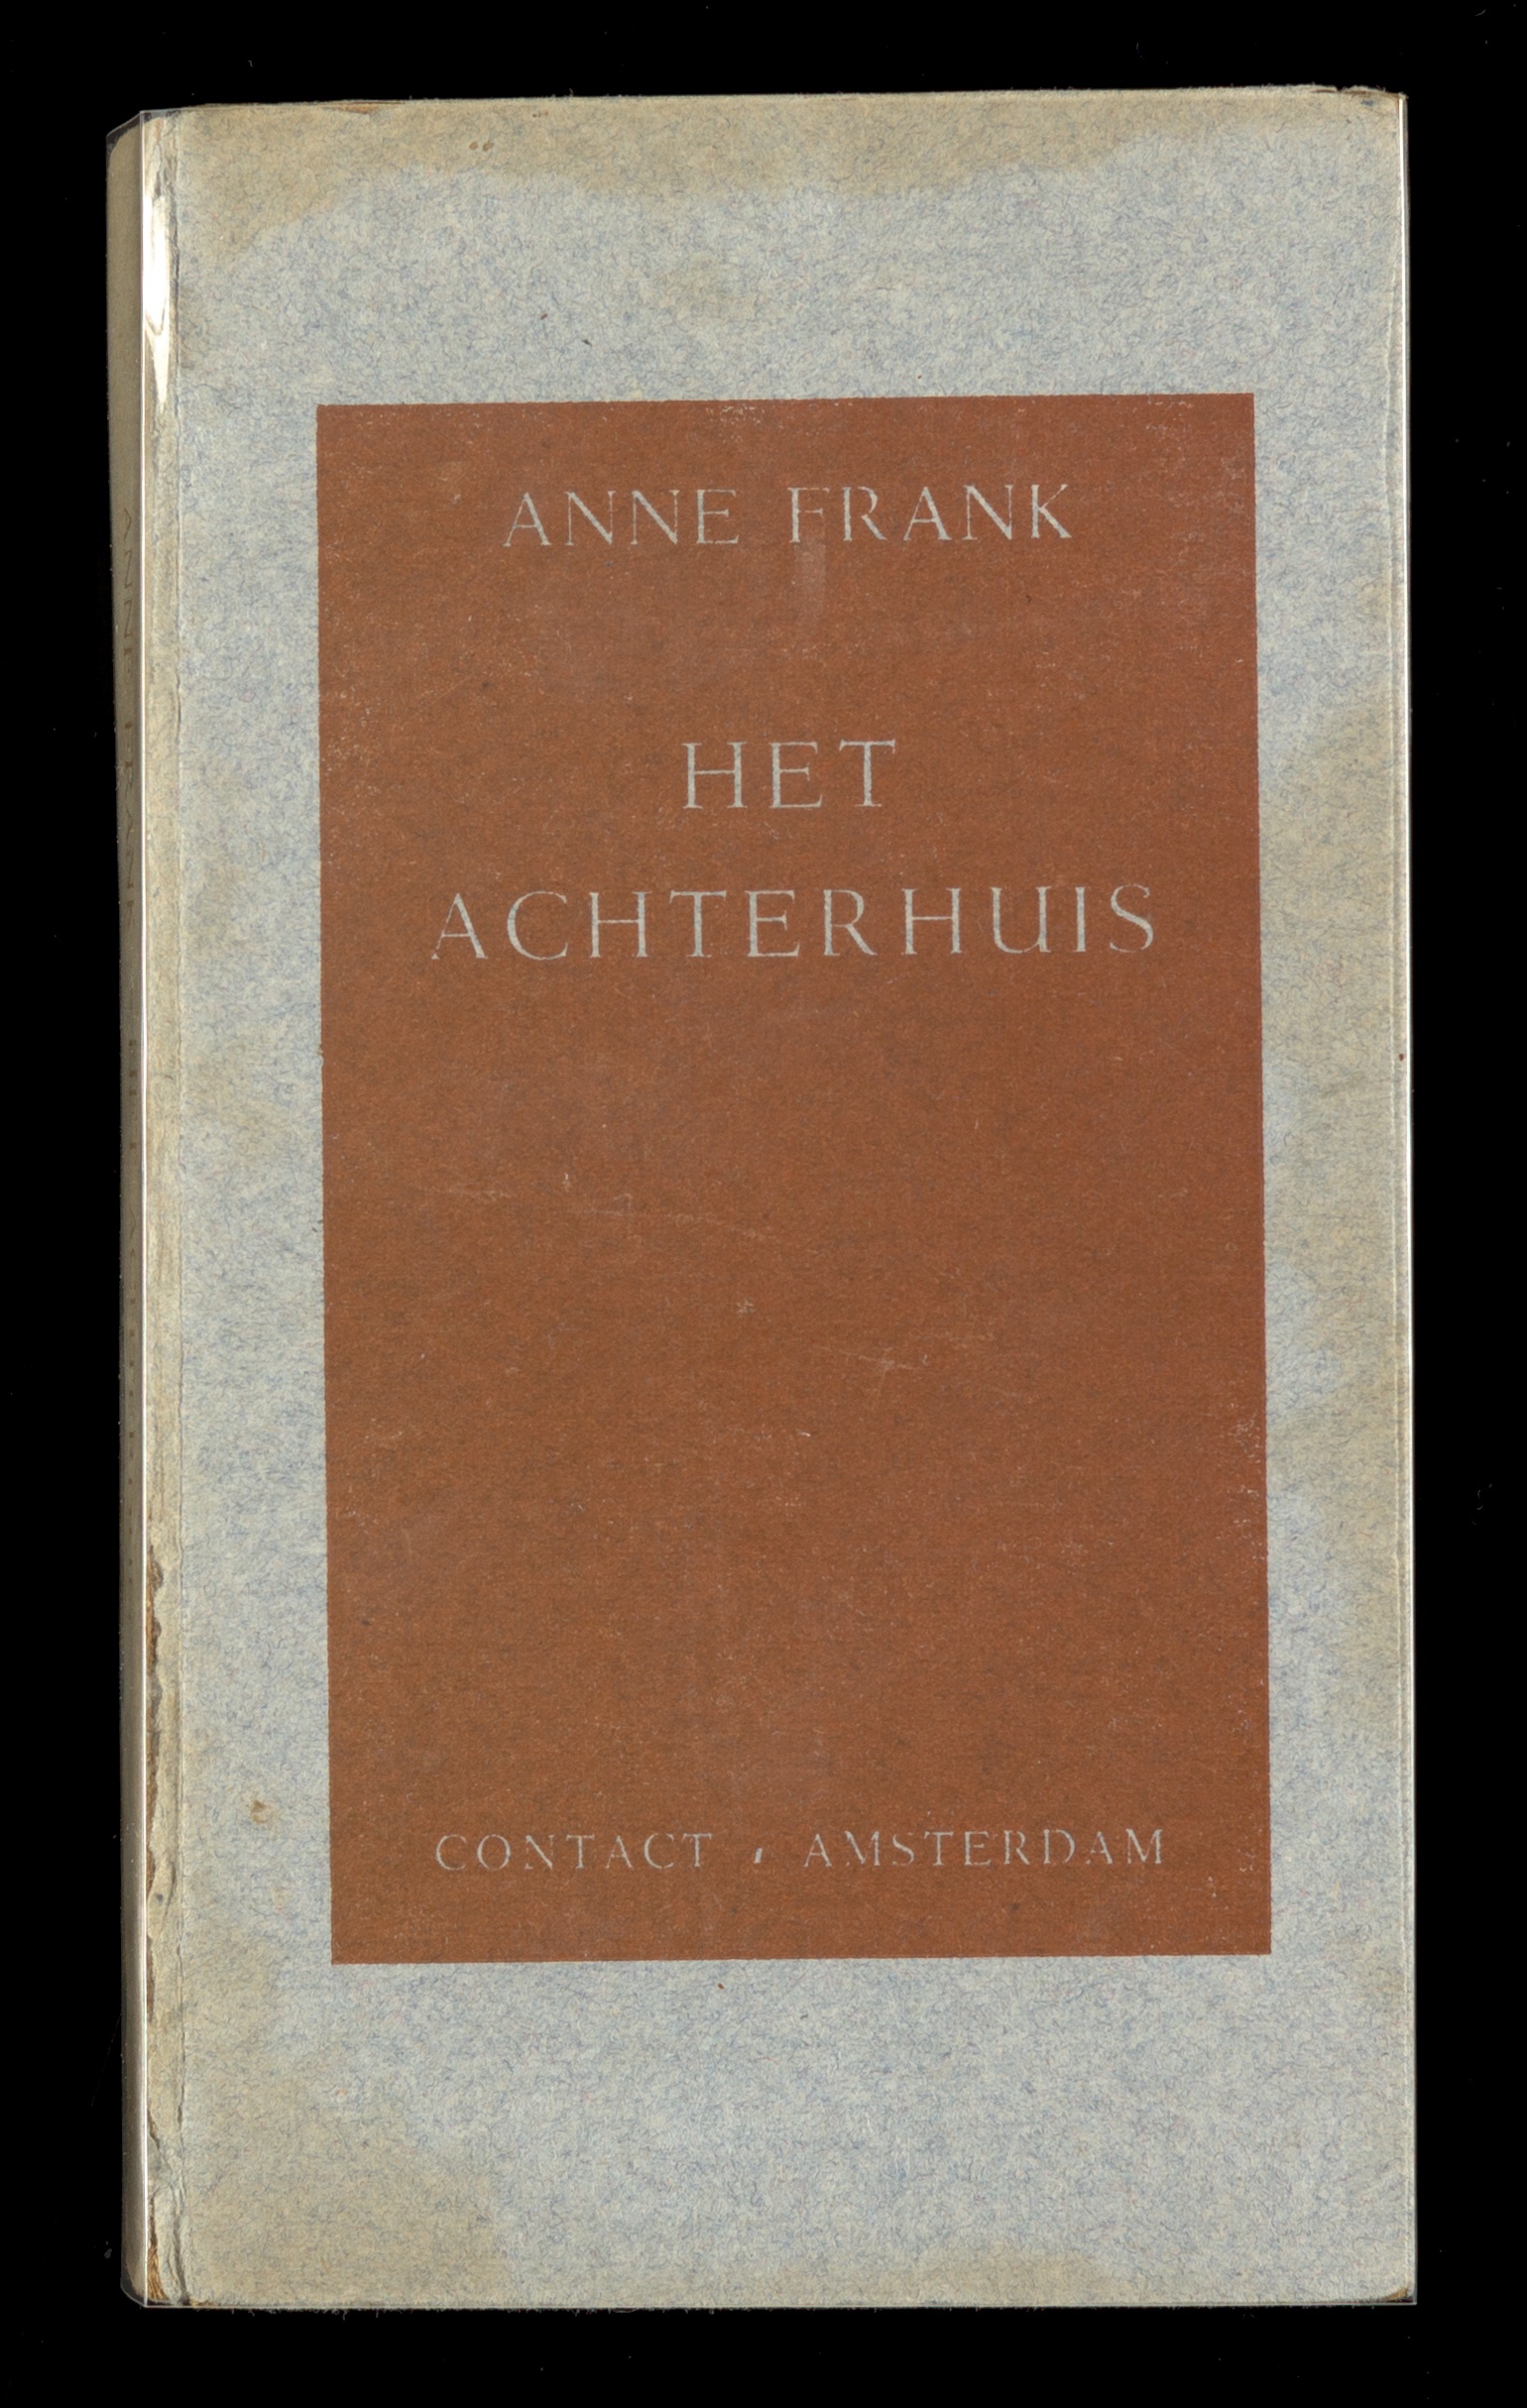 Dutch first edition of Anne Frank's Diary